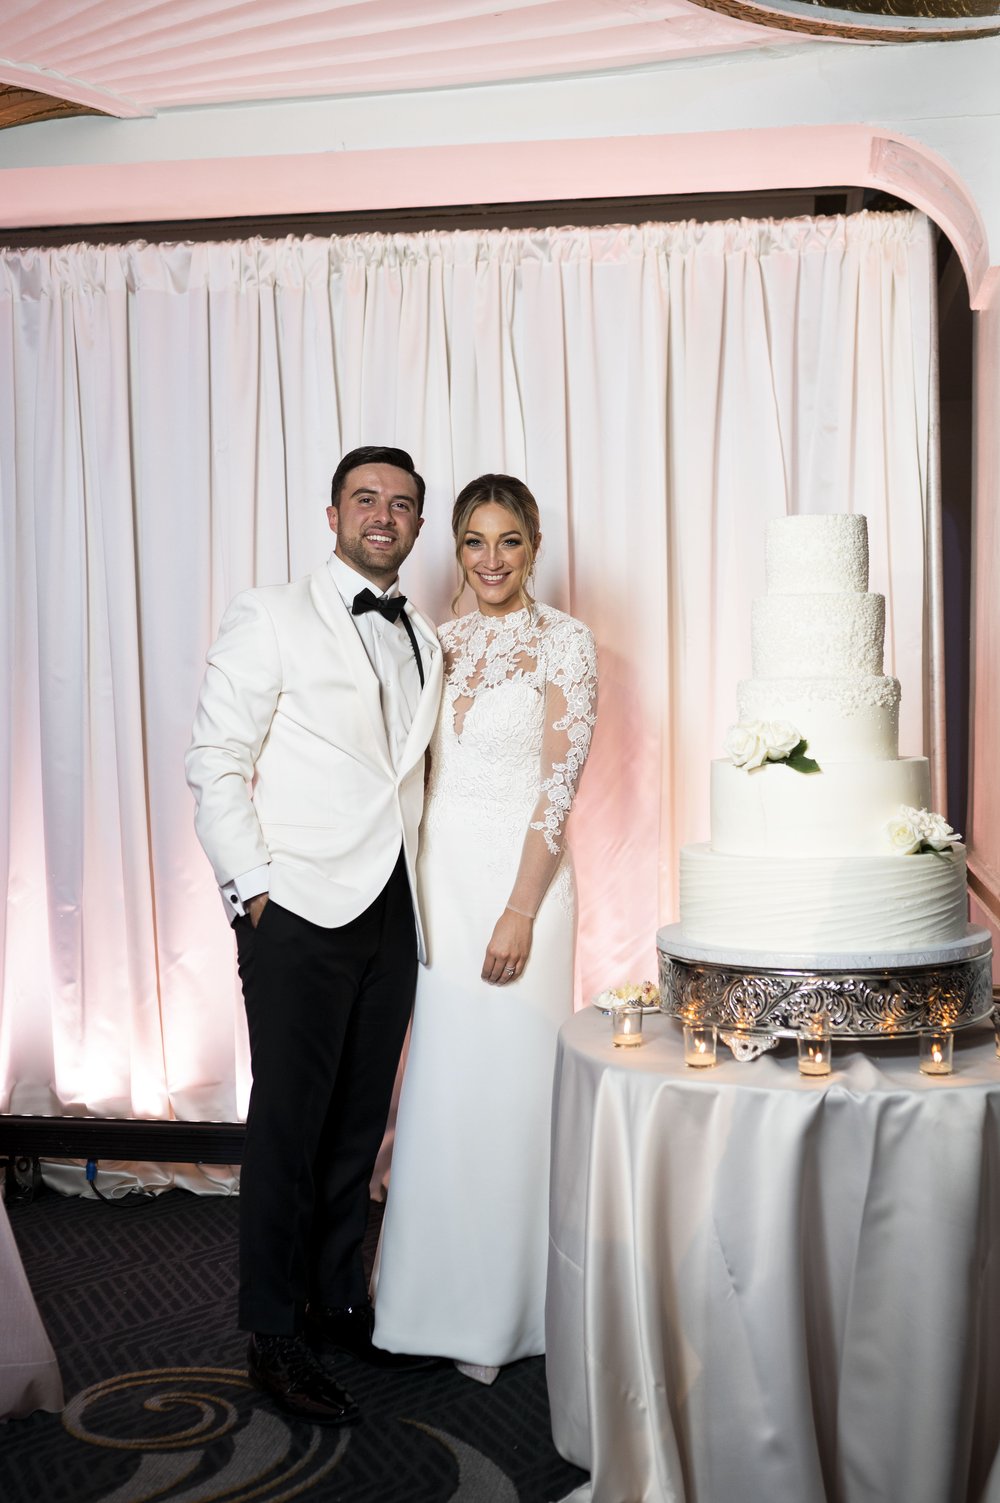 bride and groom smiling next to wedding cake